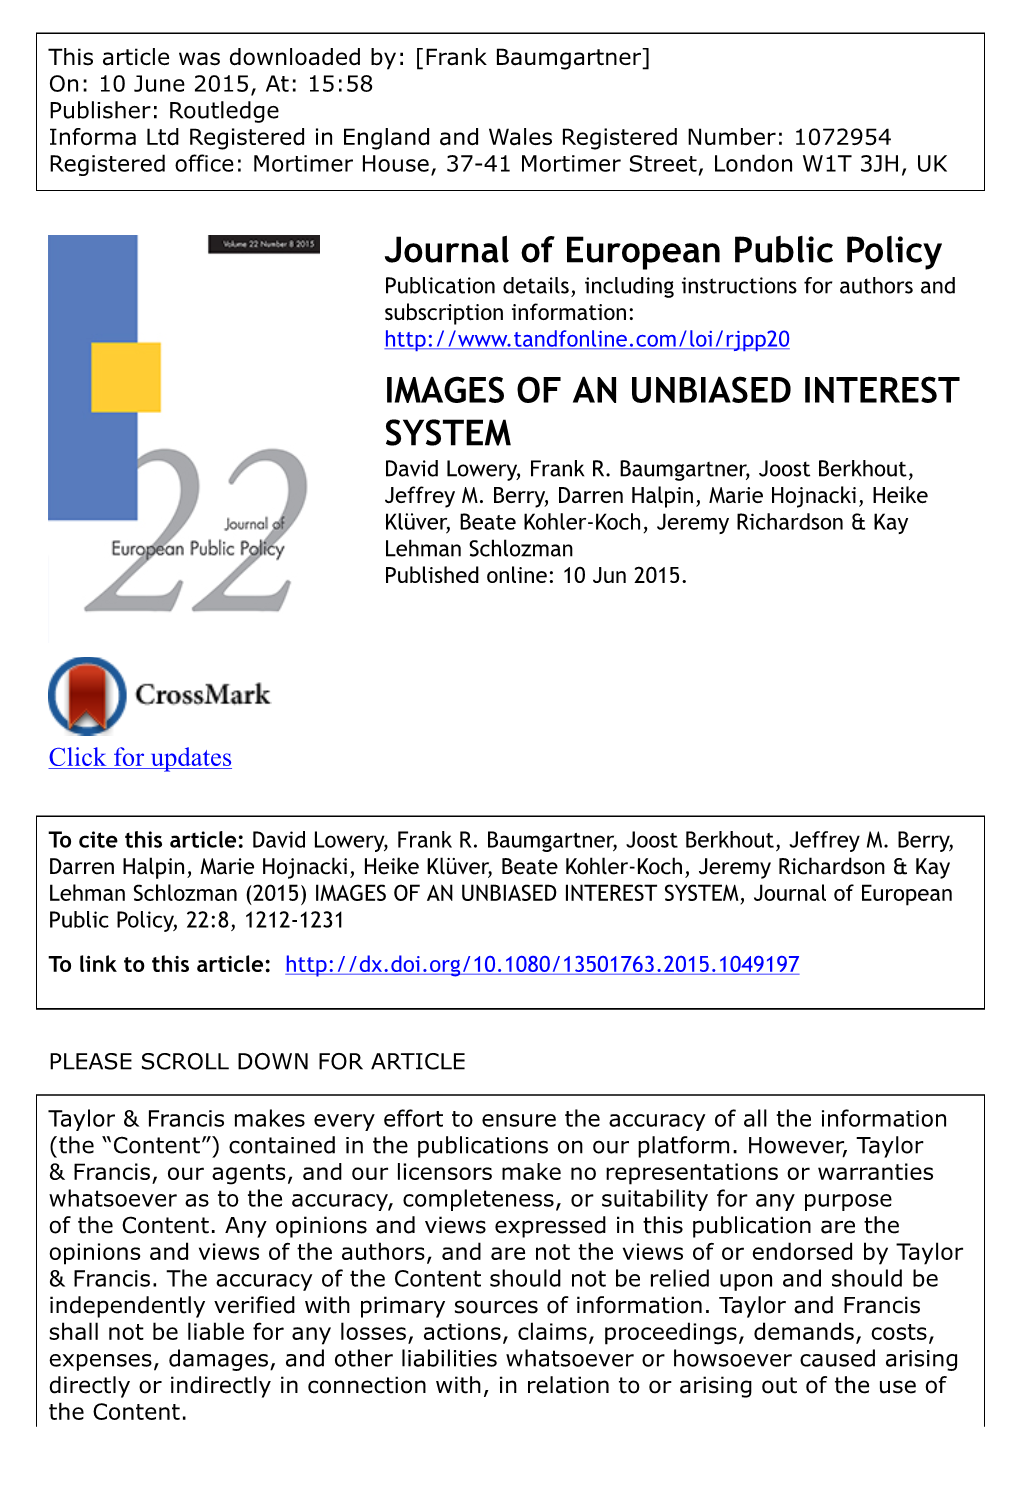 IMAGES of an UNBIASED INTEREST SYSTEM David Lowery, Frank R